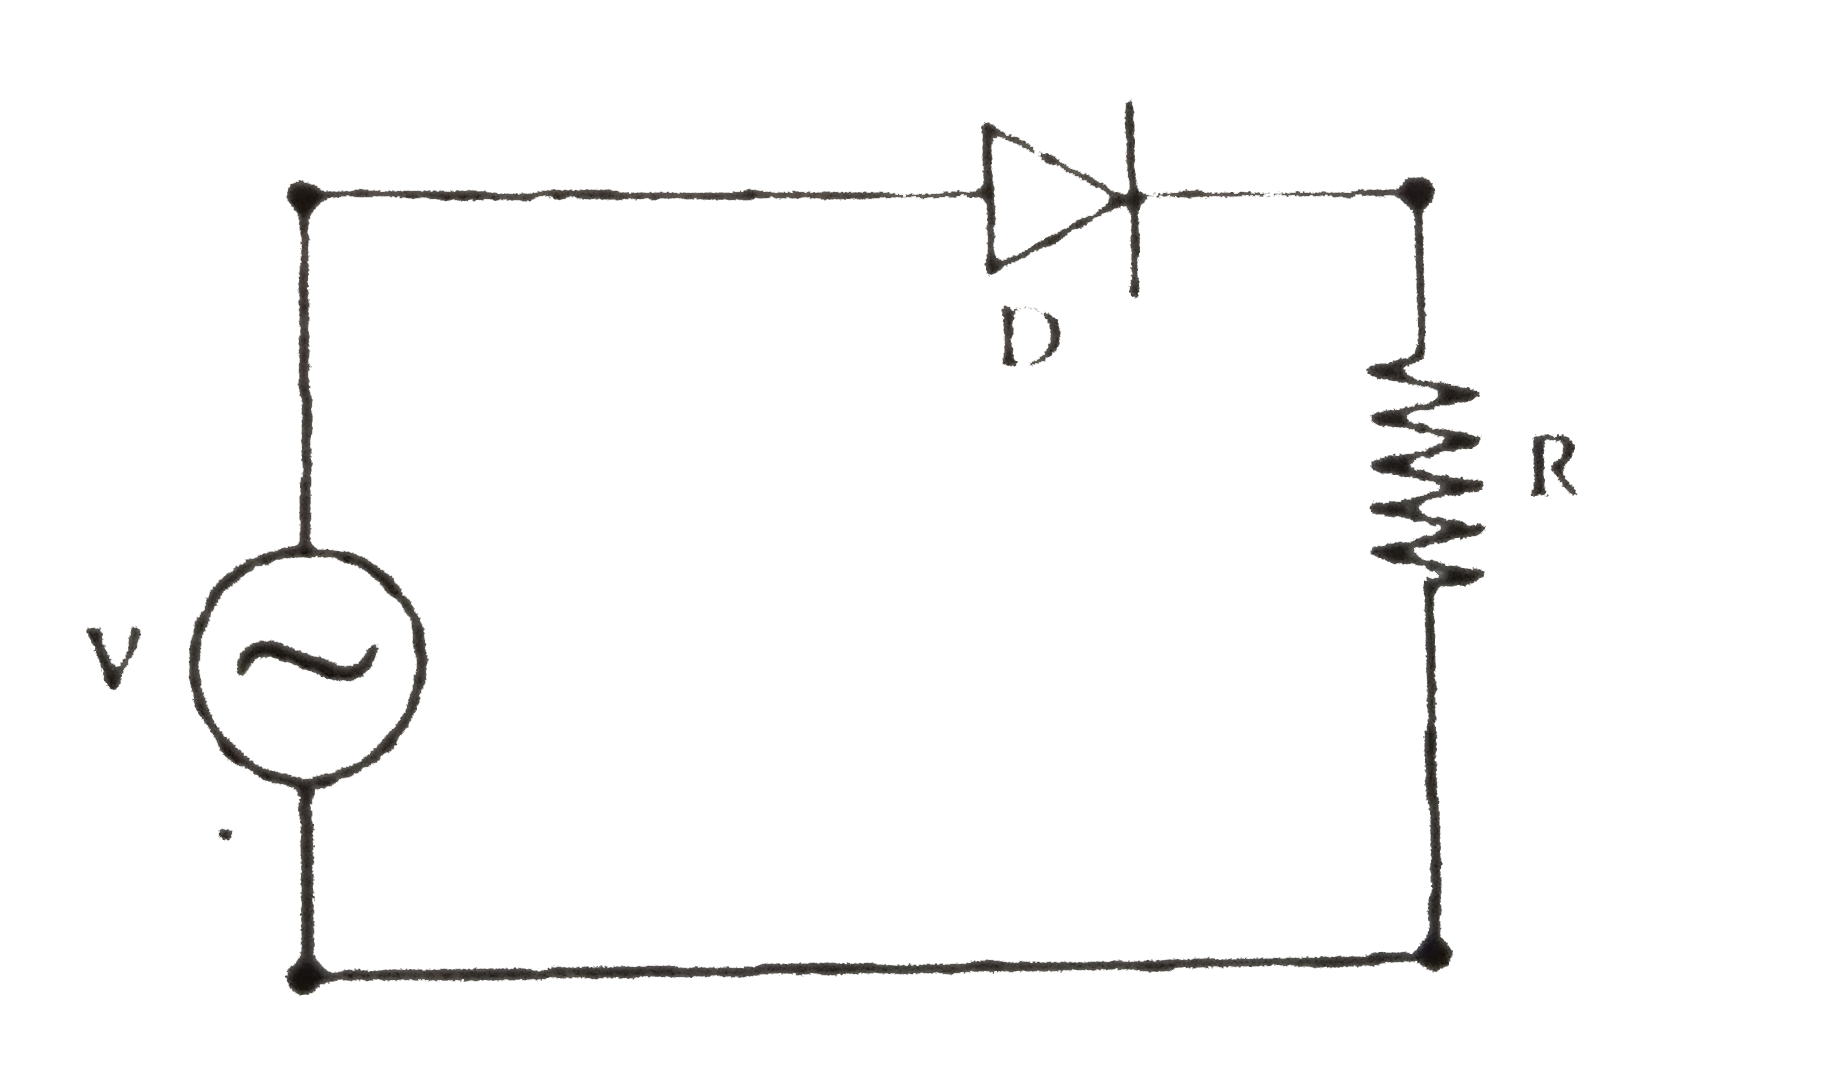 A p -n junction (D) shown in the figure can act as a rectifier. An alternating current source (V) is connected in the circuit